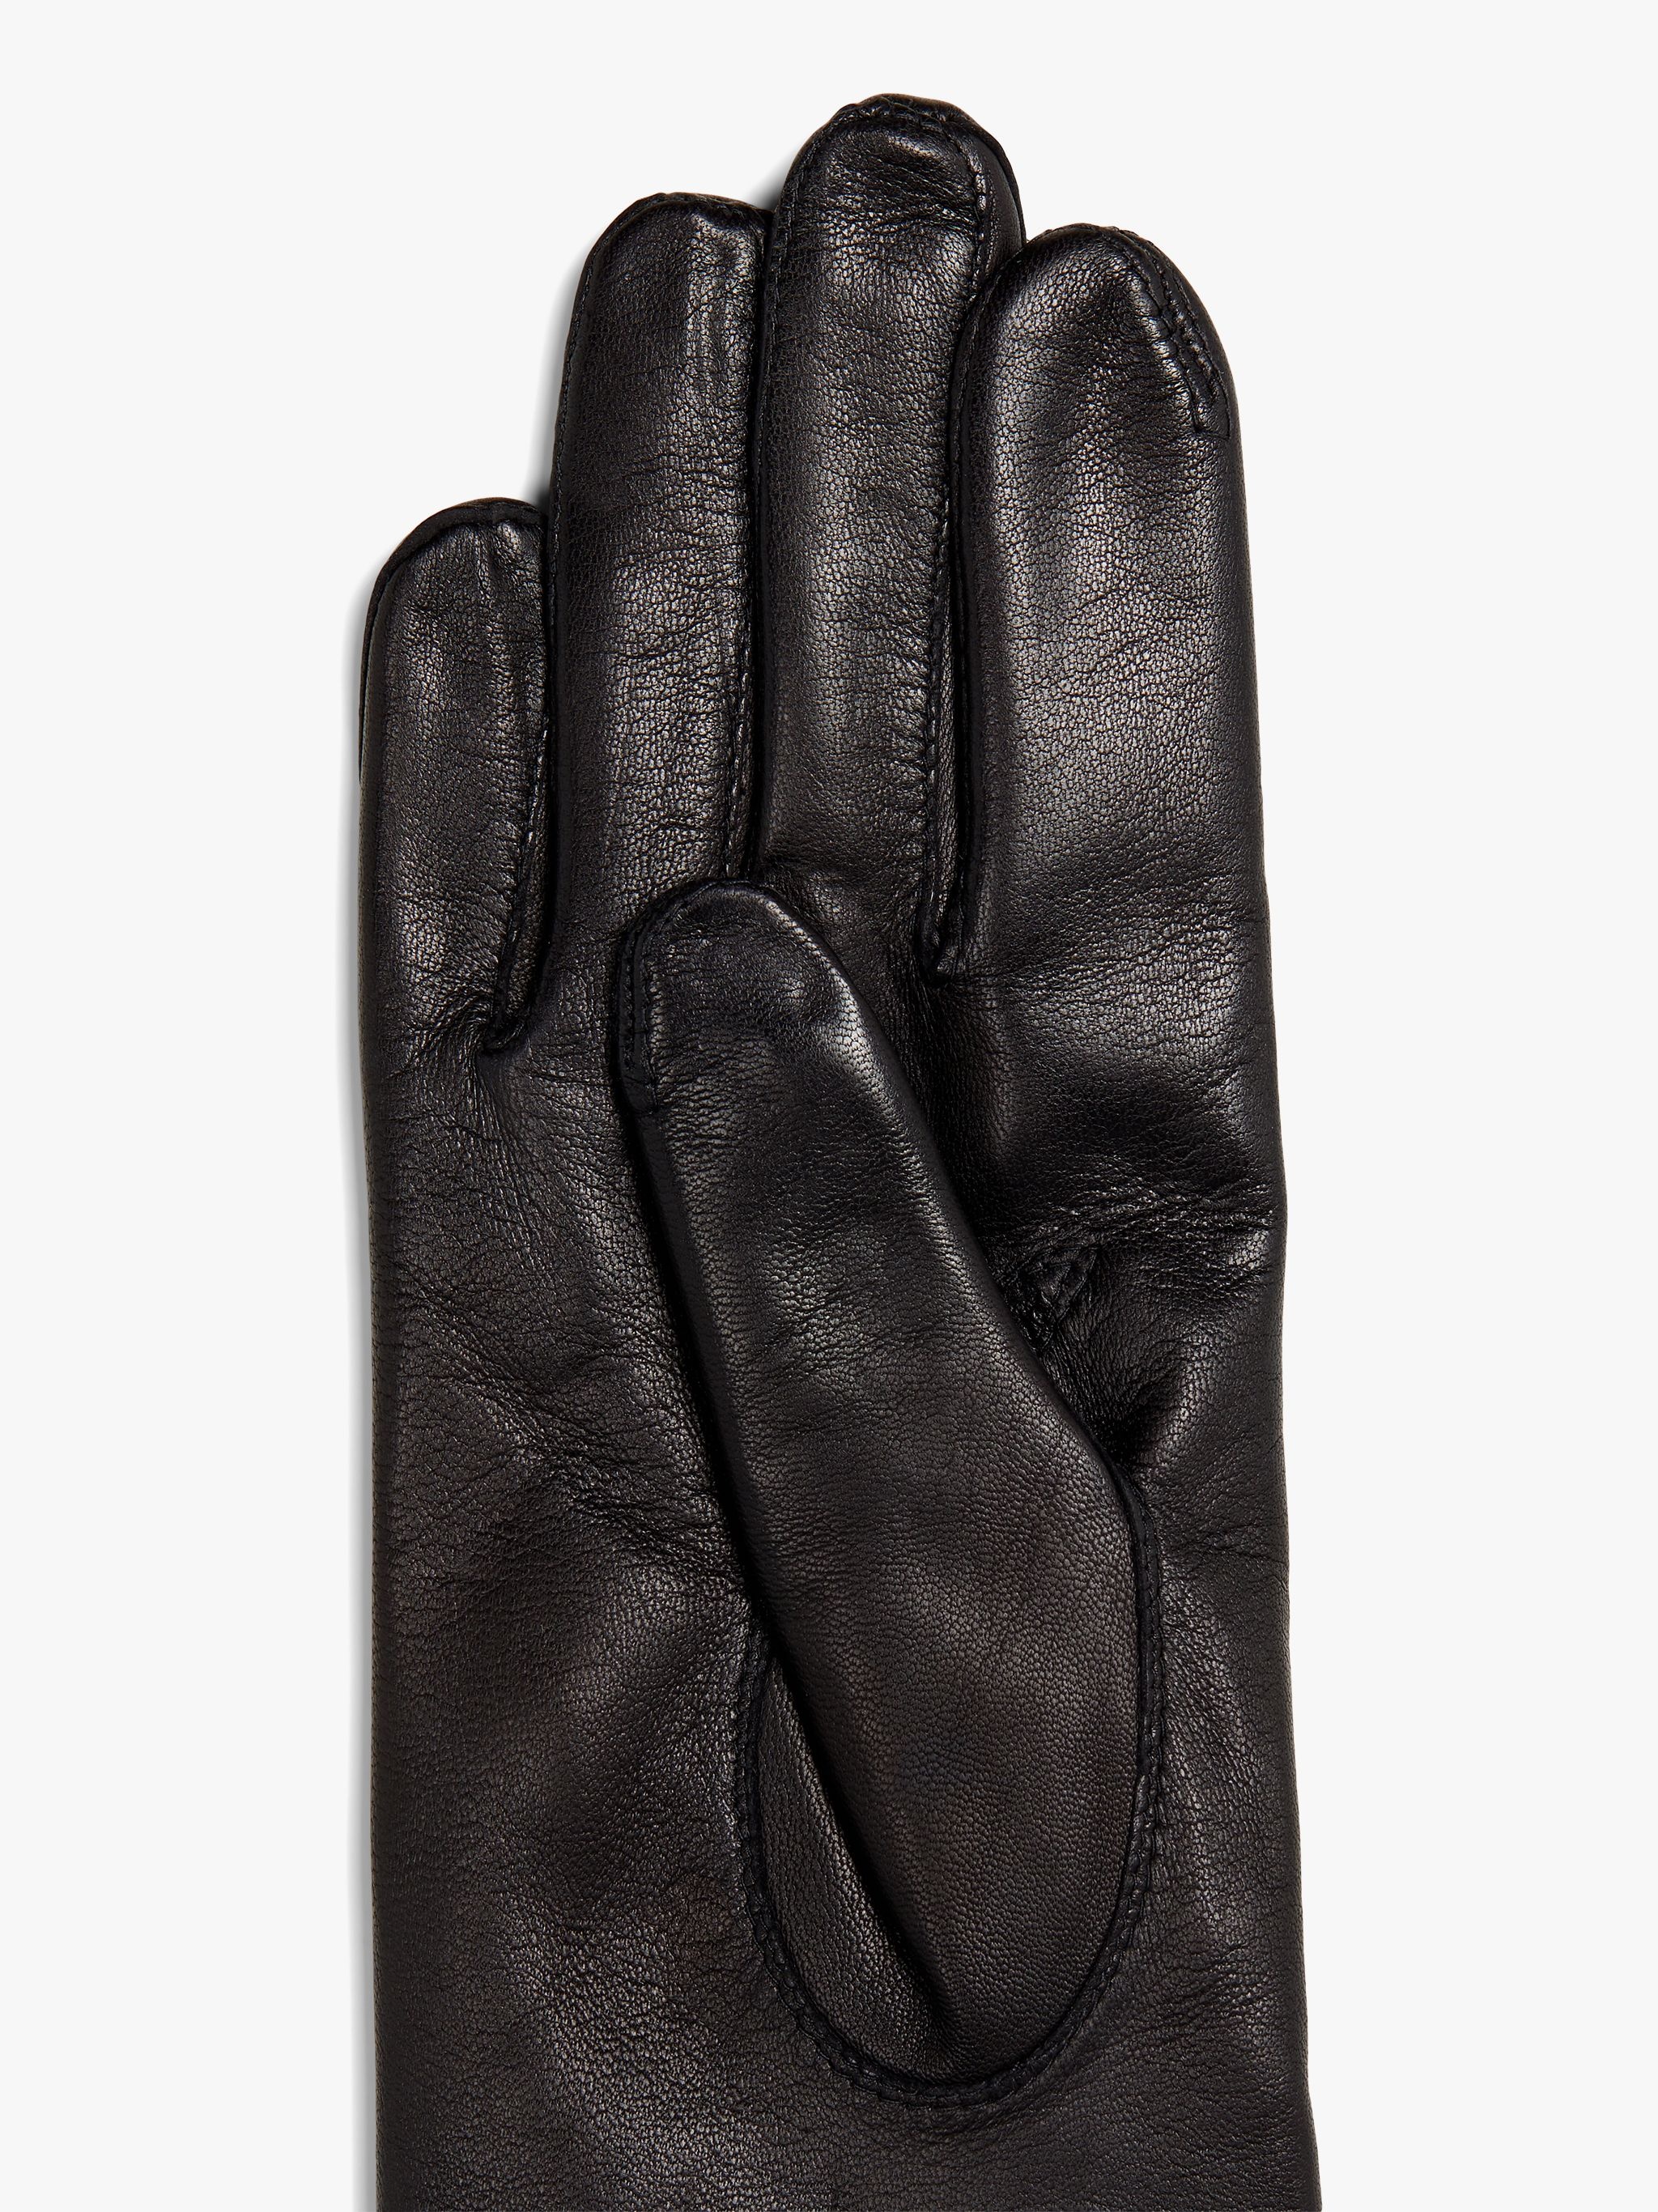 BLACK HAIRSHEEP LEATHER CASHMERE LINED GLOVES - 2